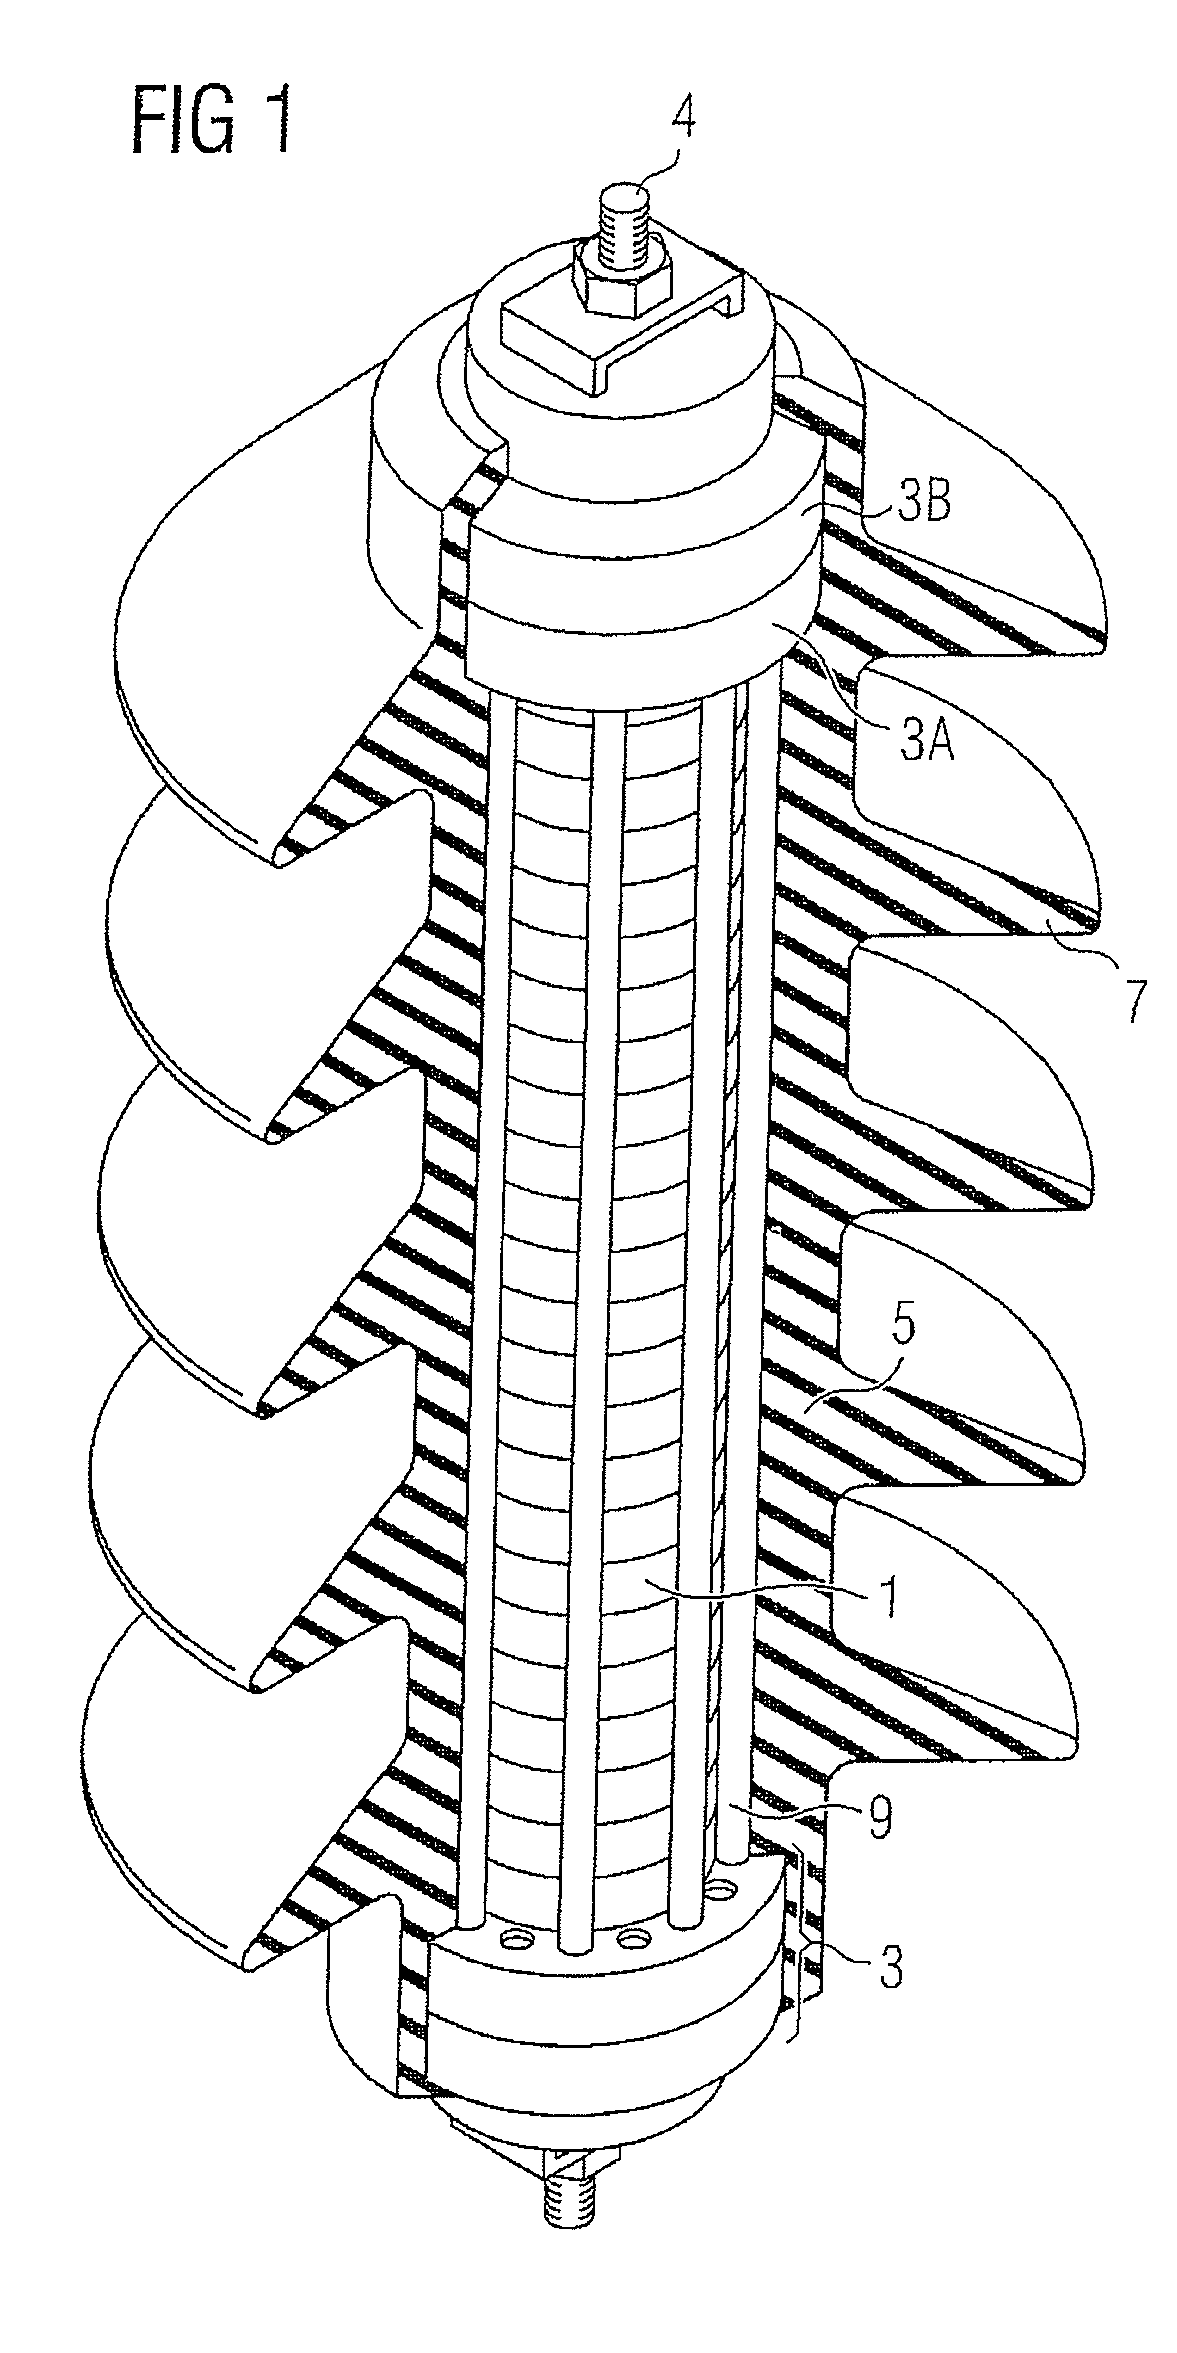 Surge arrester with a cage design